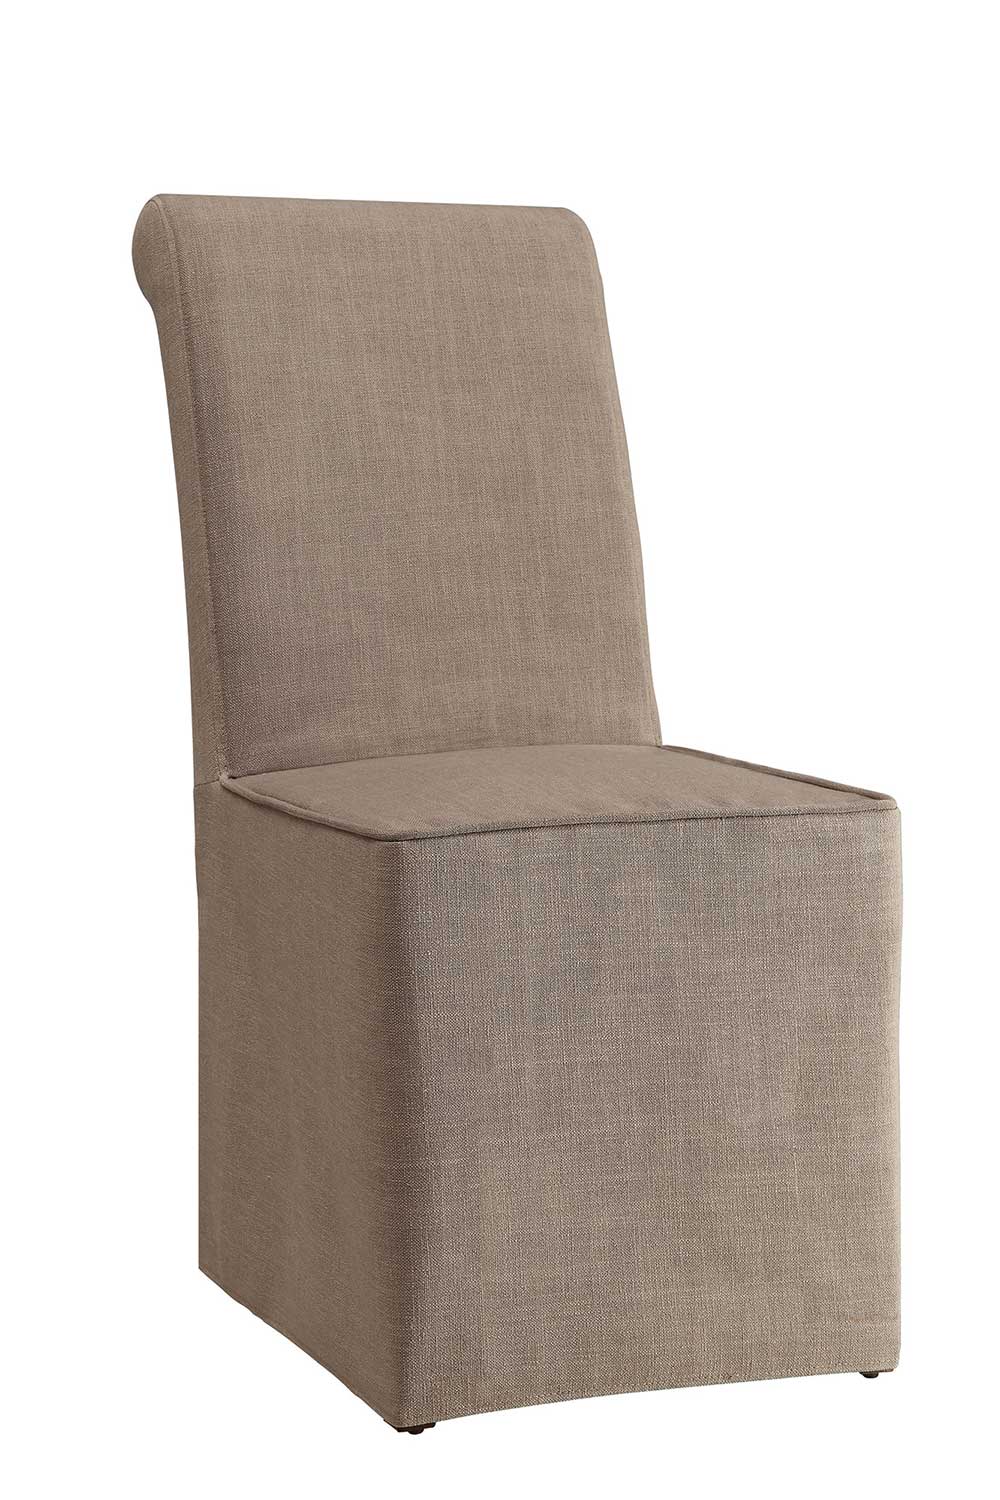 Coaster Galloway Dining Side Chair - Beige